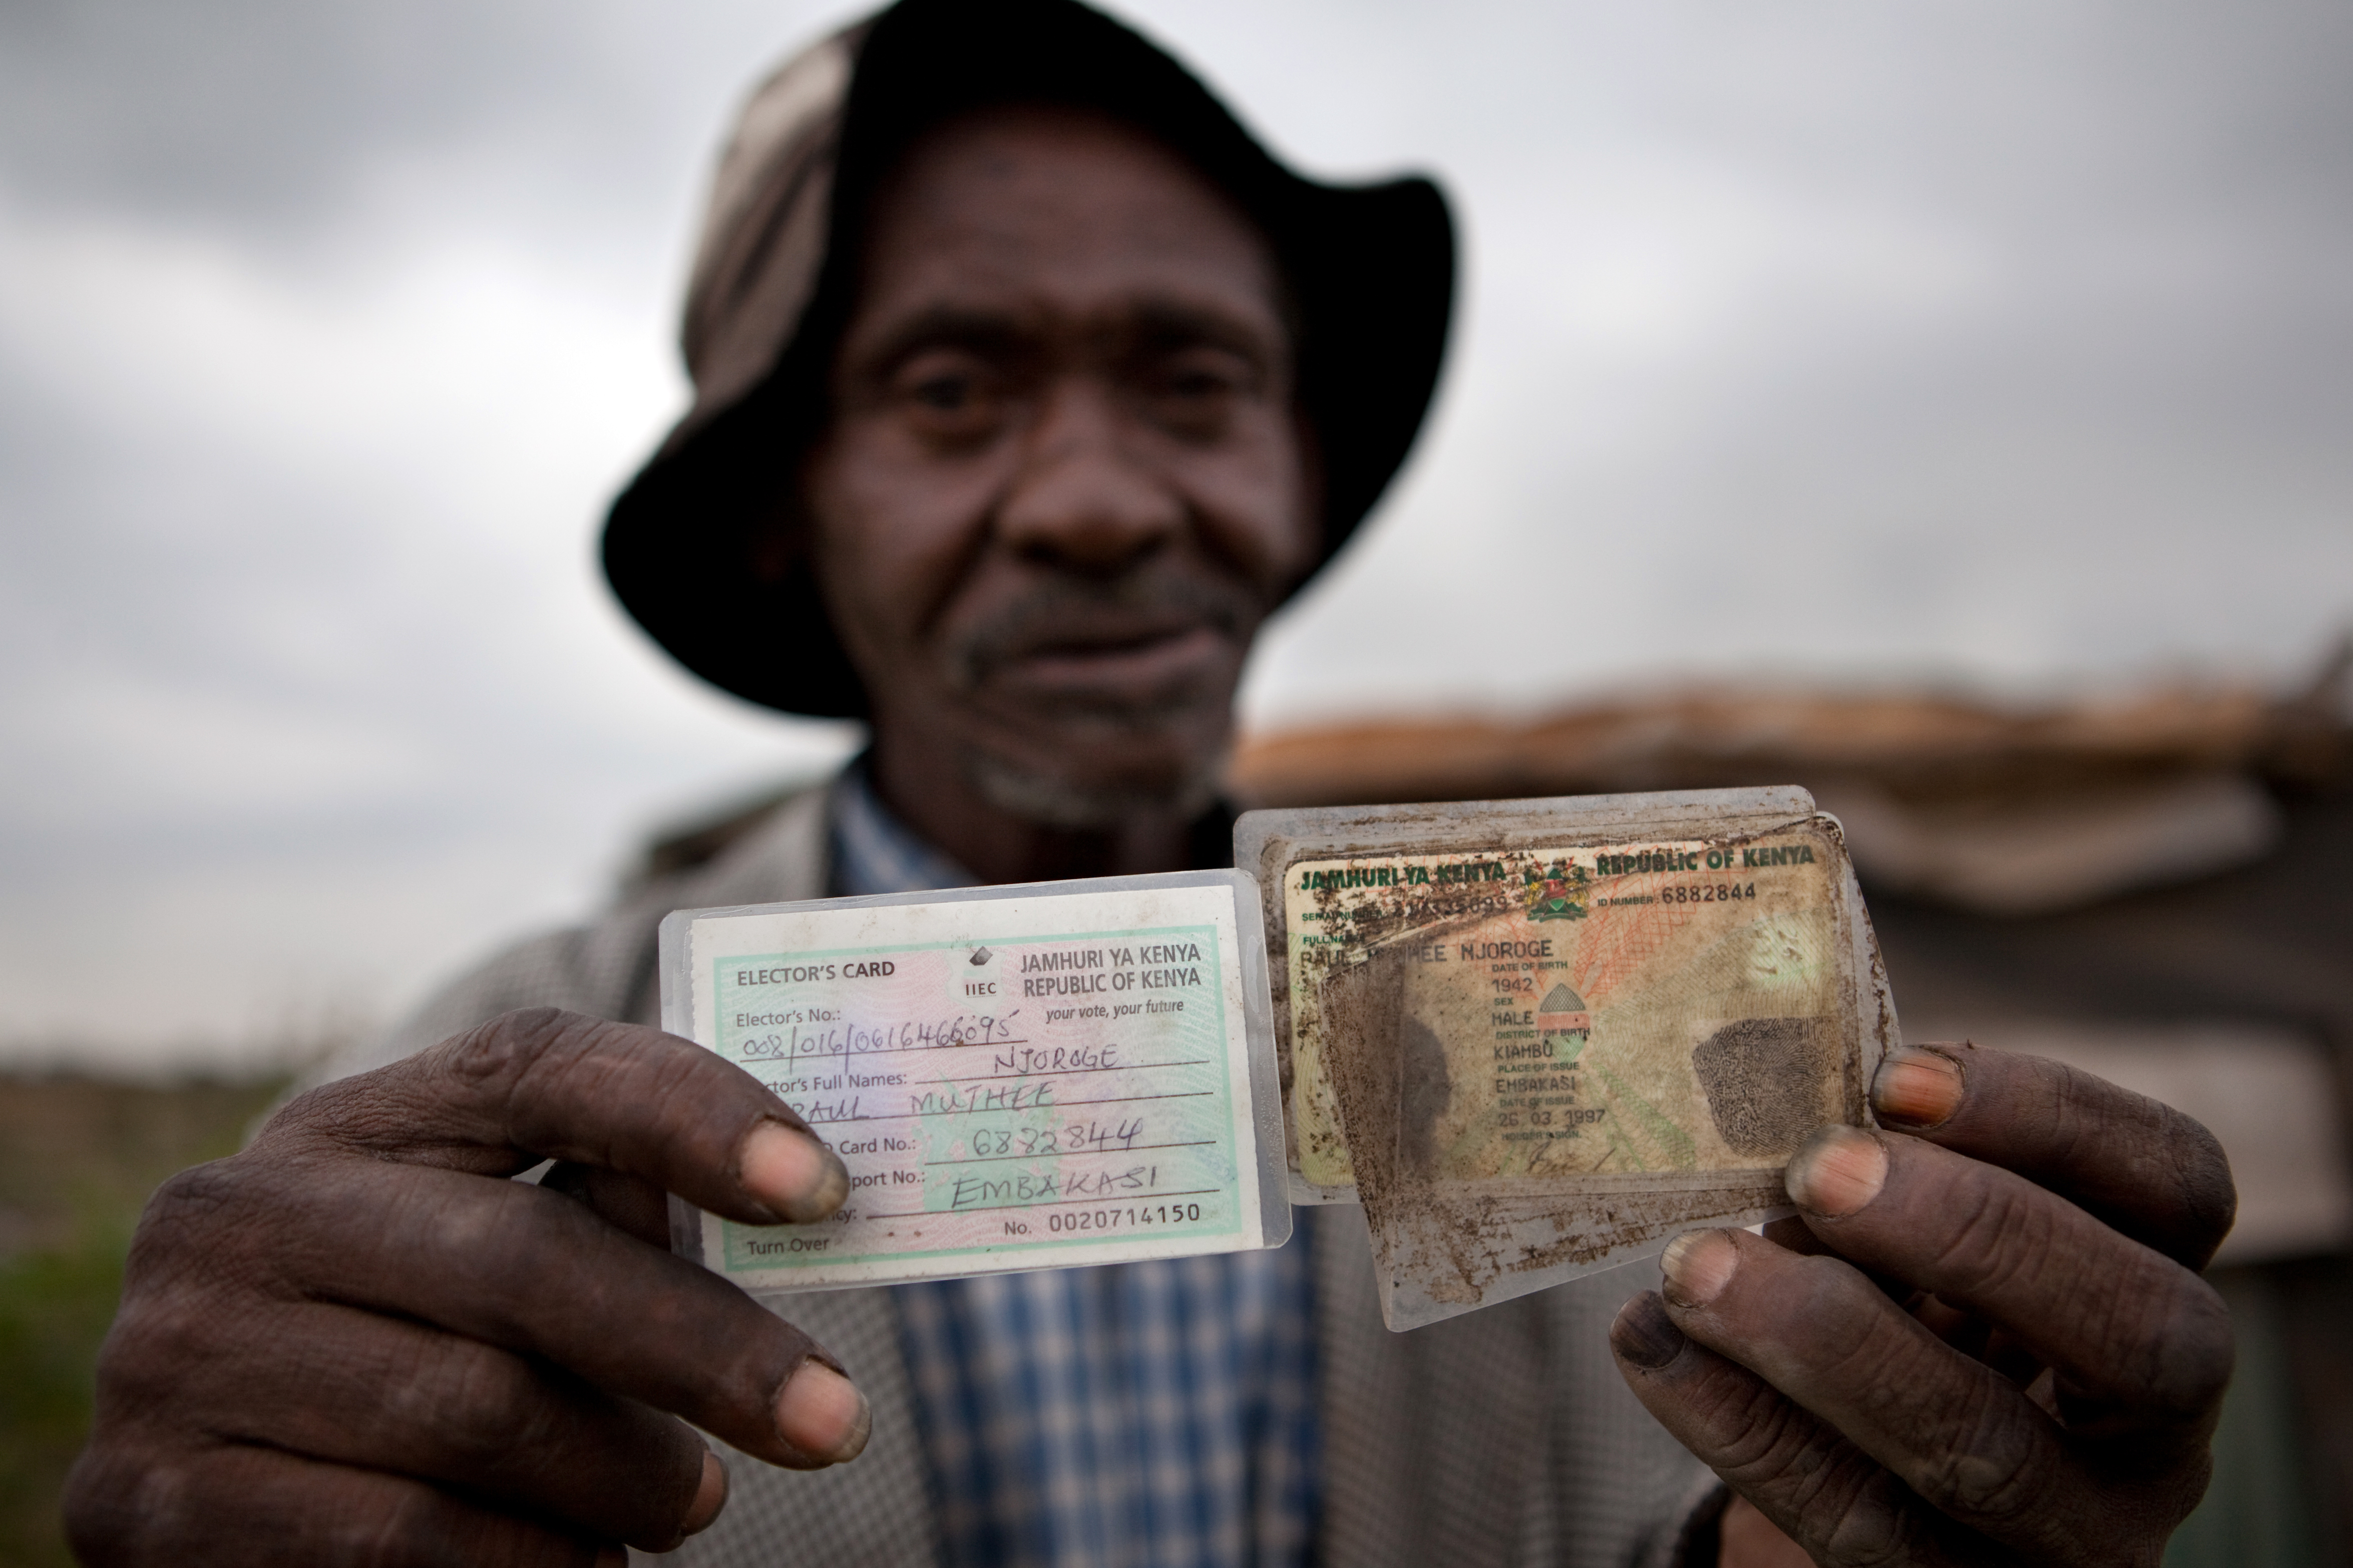 Paul, Mozambique, holds up the ID card which allows him to access his pension.